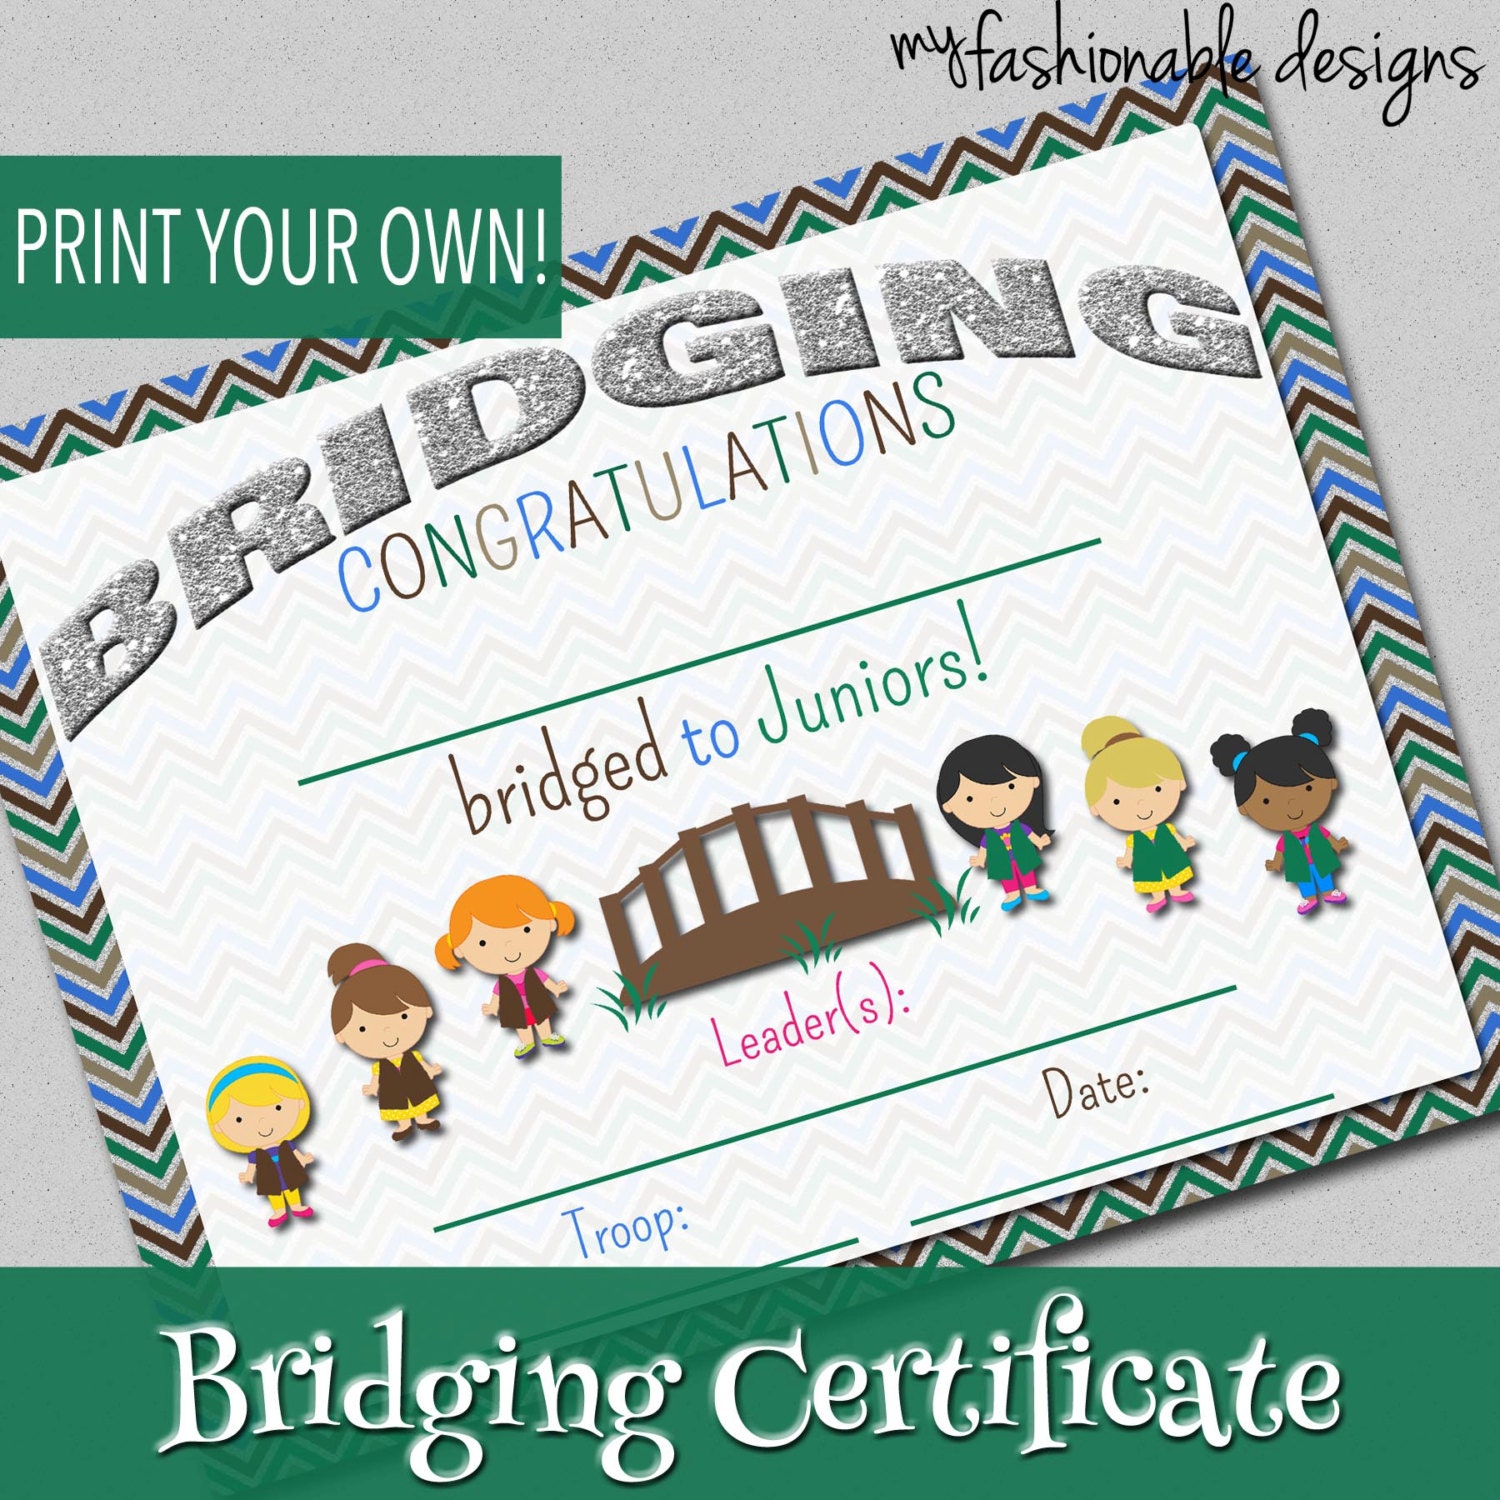 Bridging Certificate Print Your Own by MyFashionableDesigns